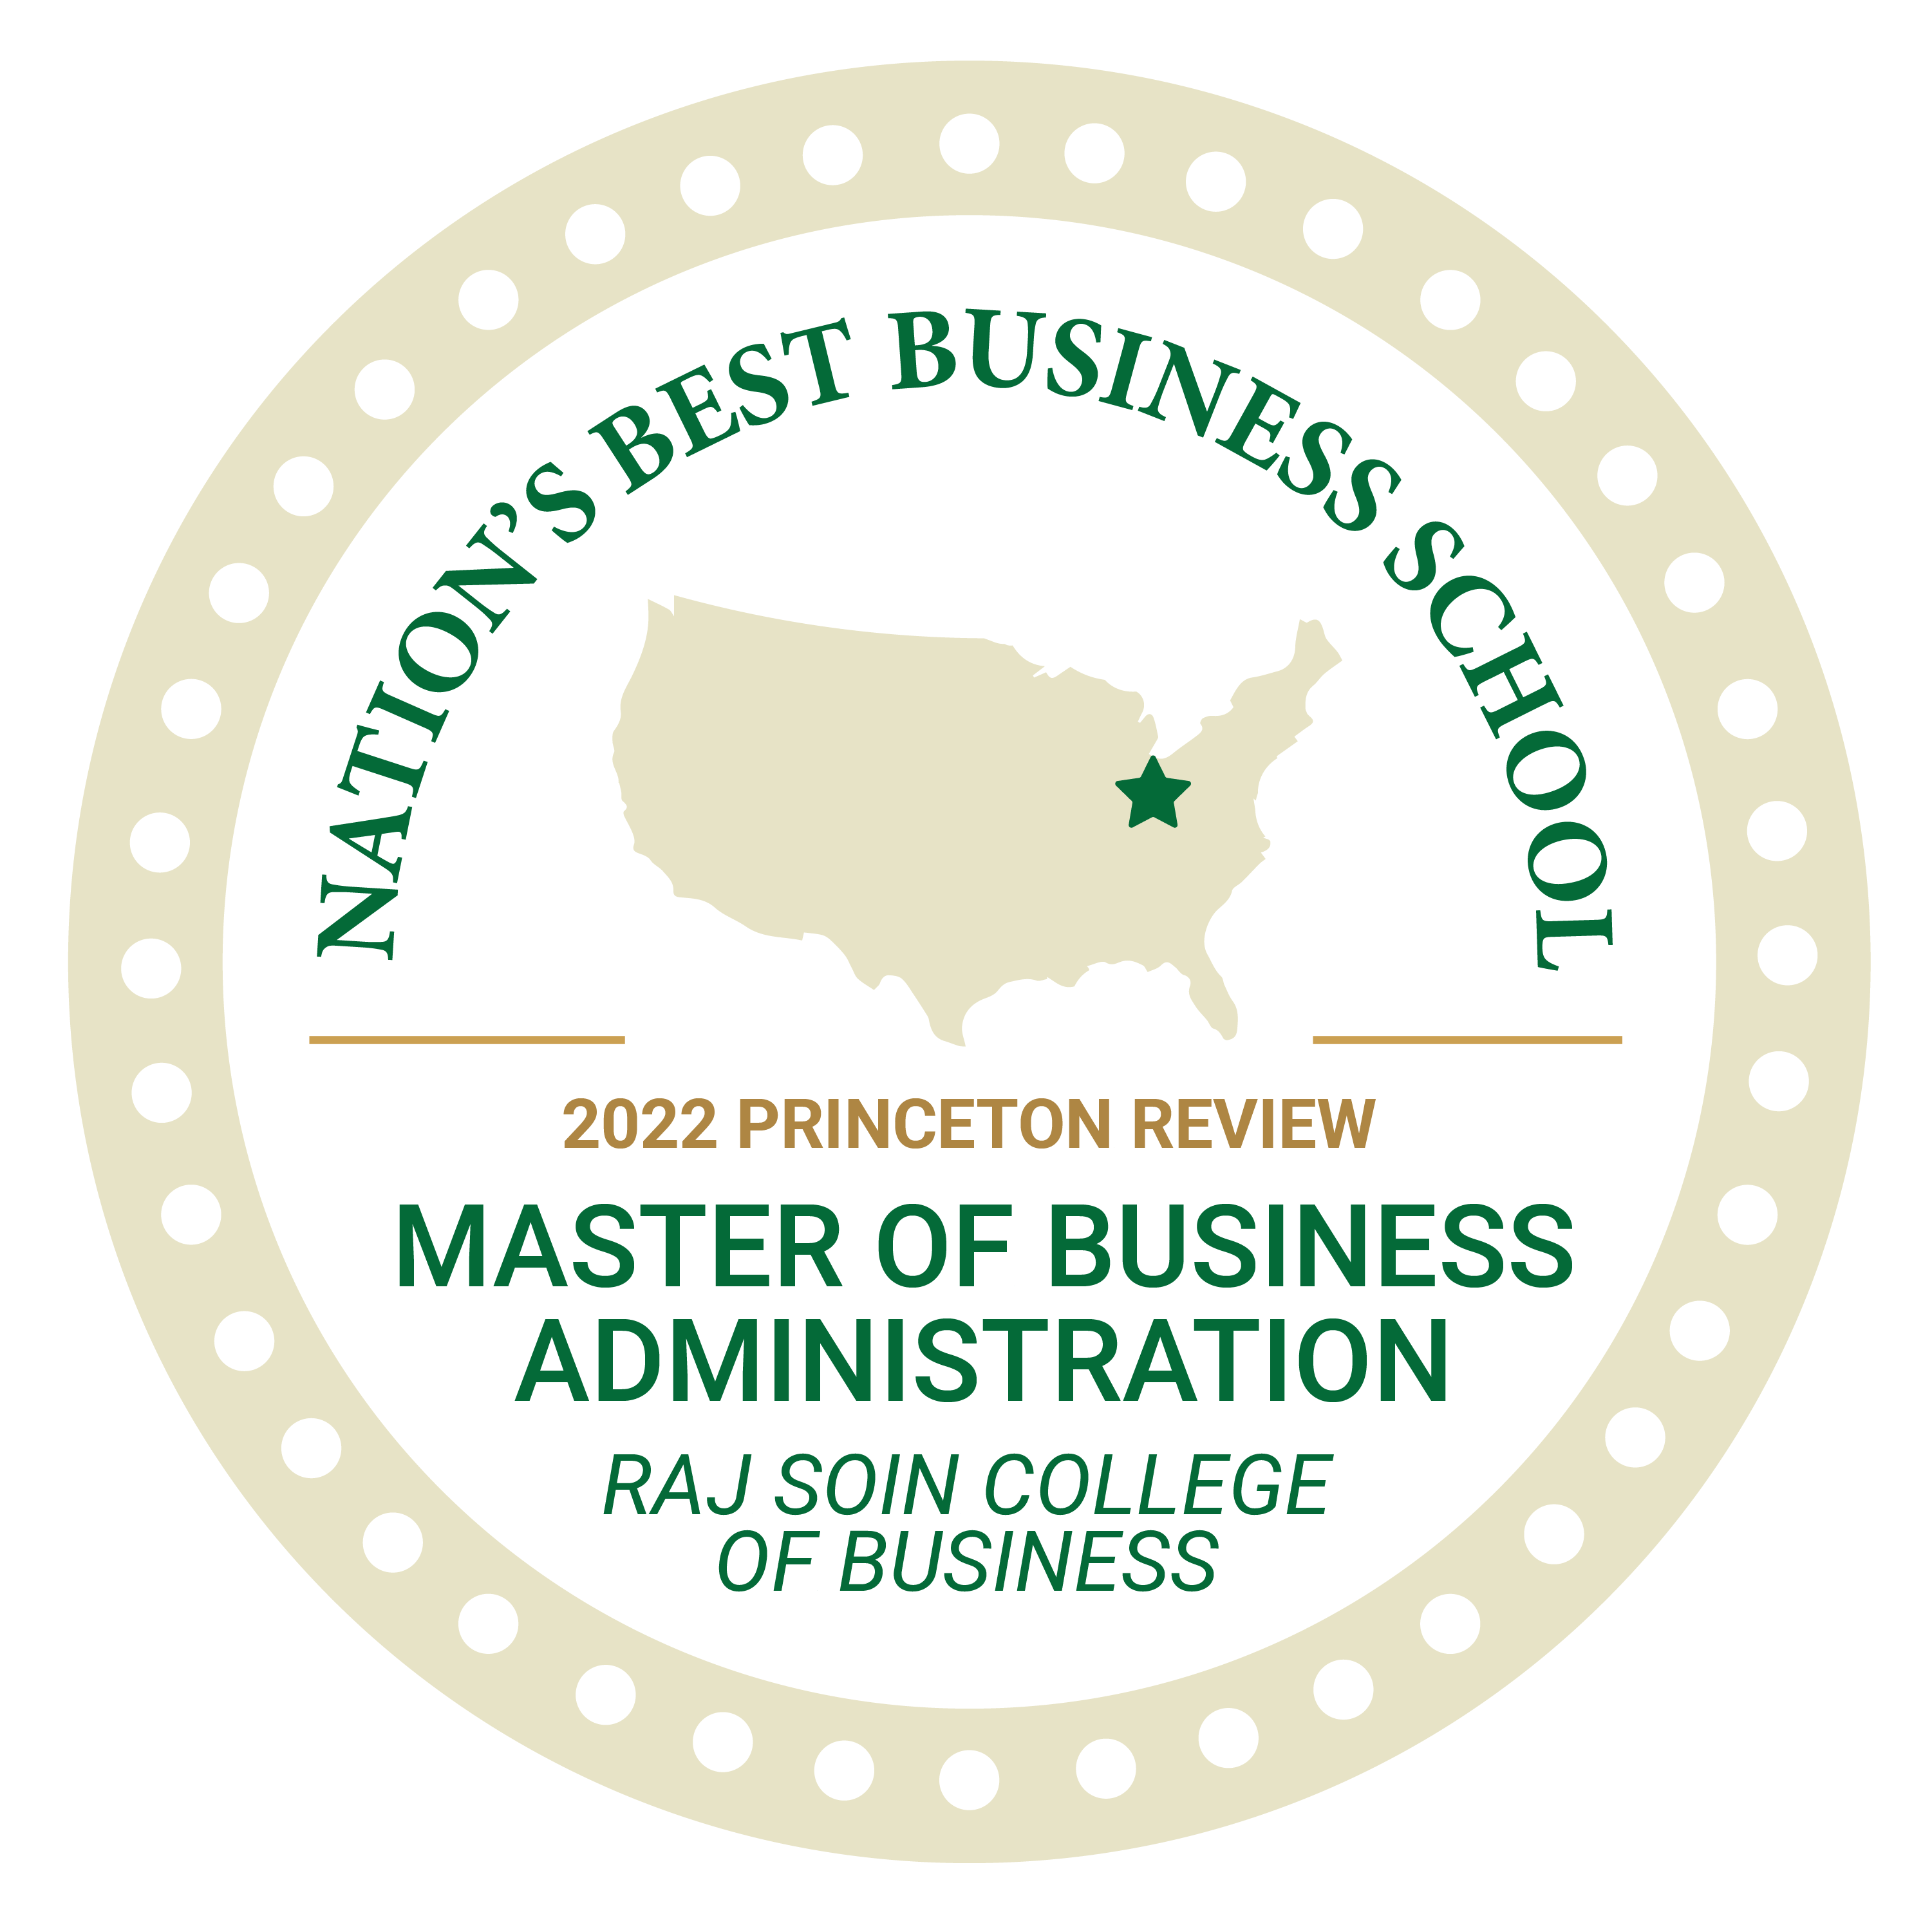 2022 Princeton Review Nation's Top Business School Master of Business Administration Raj Soin College of Business